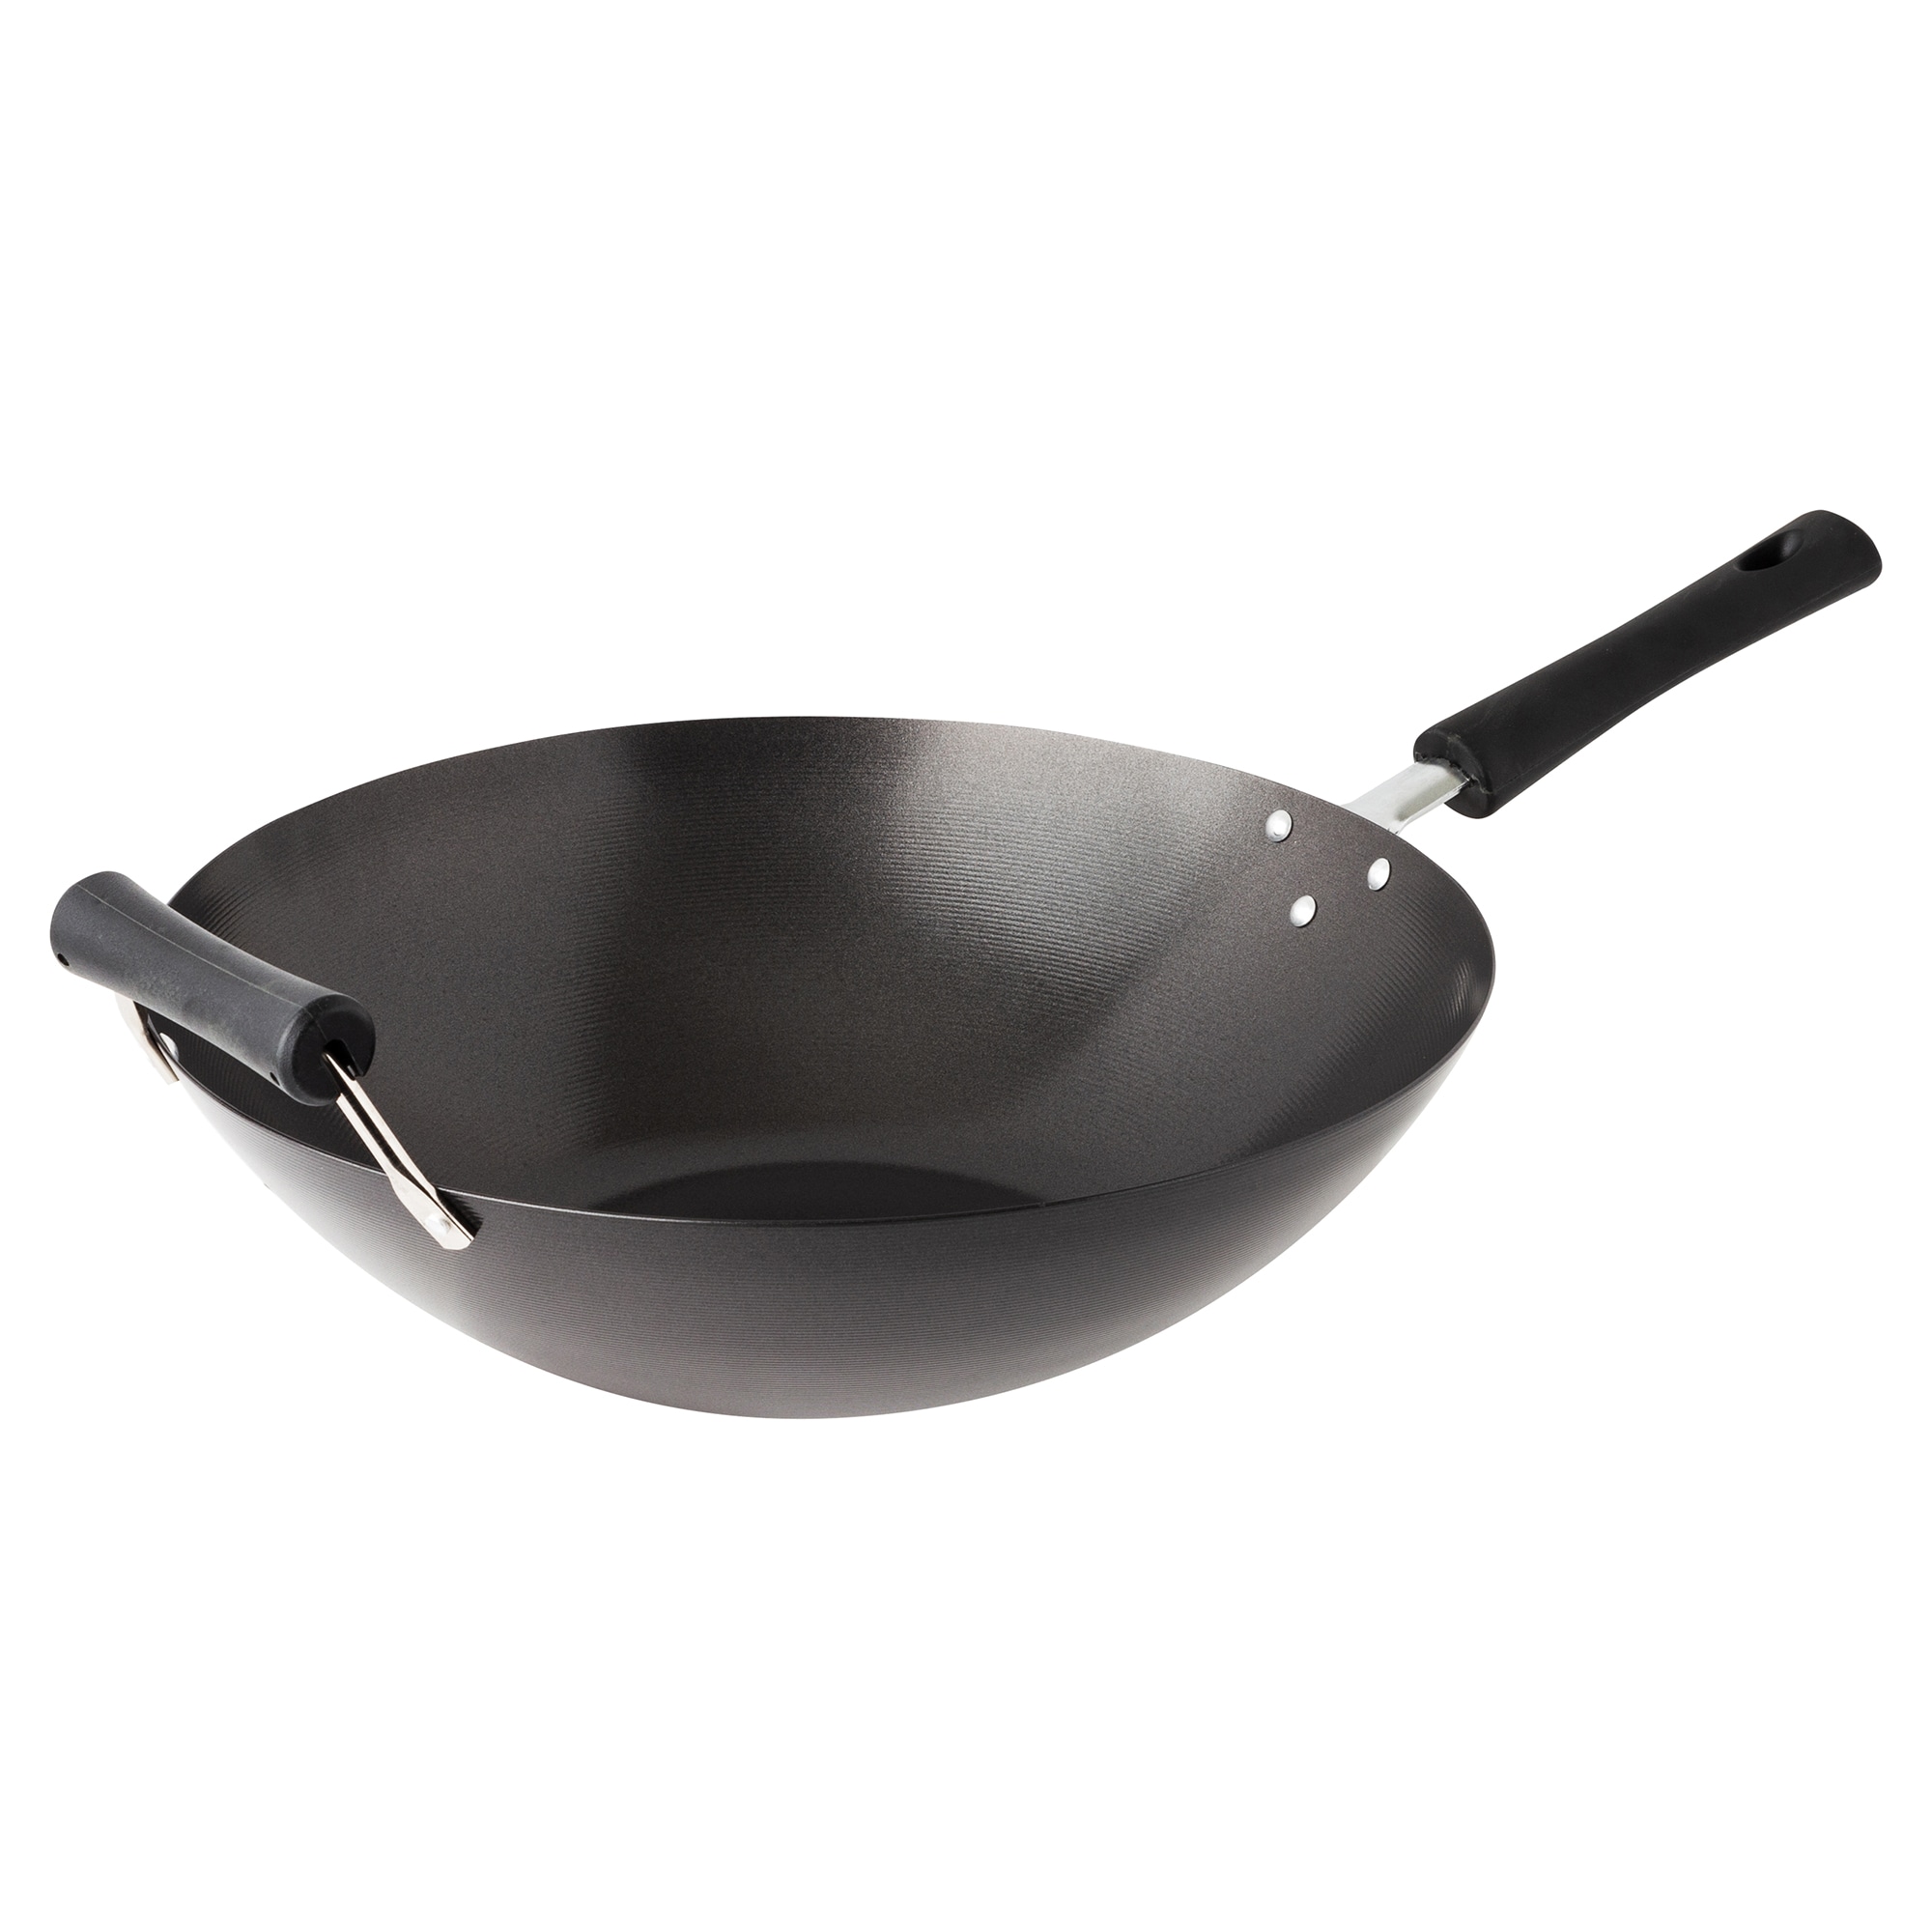 Potted Pans Cast Iron Wok with Handle - Pre-Seasoned 14 inch Wok for Cooking